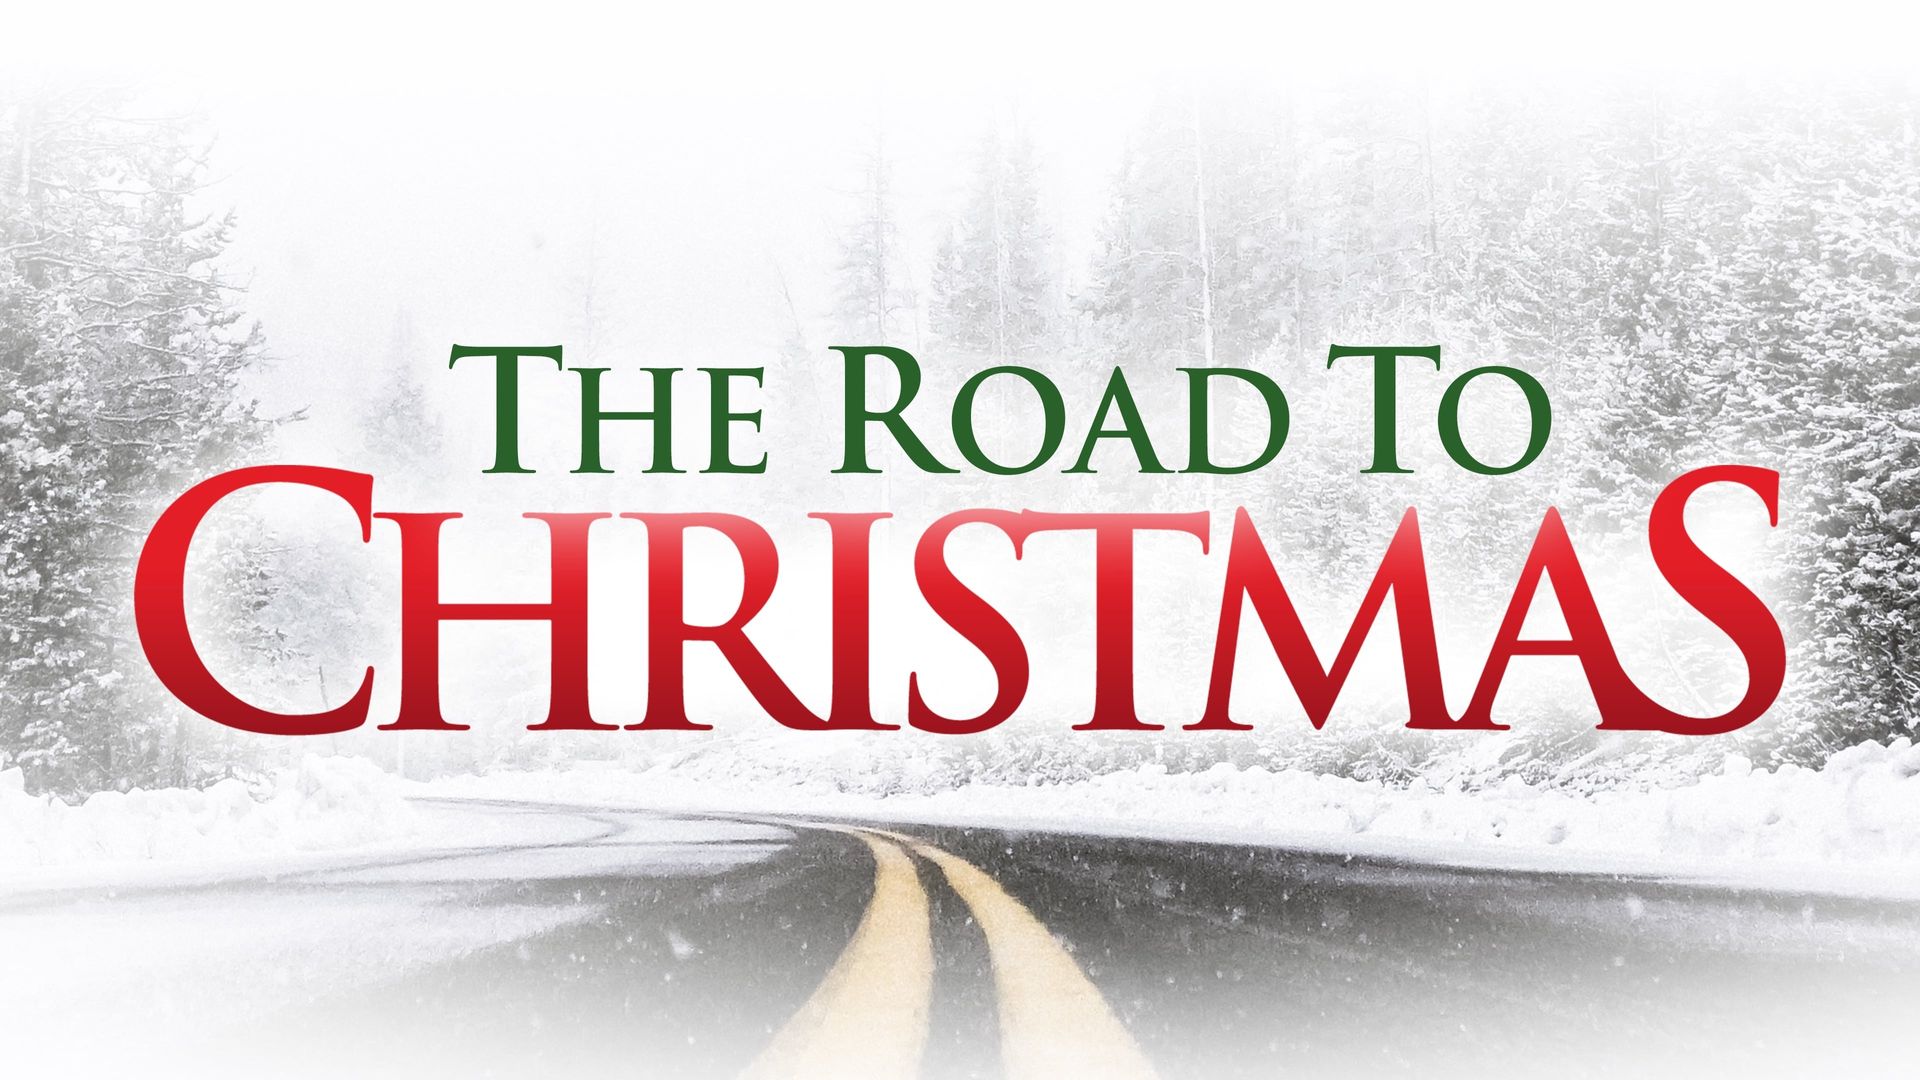 The Road to Christmas background